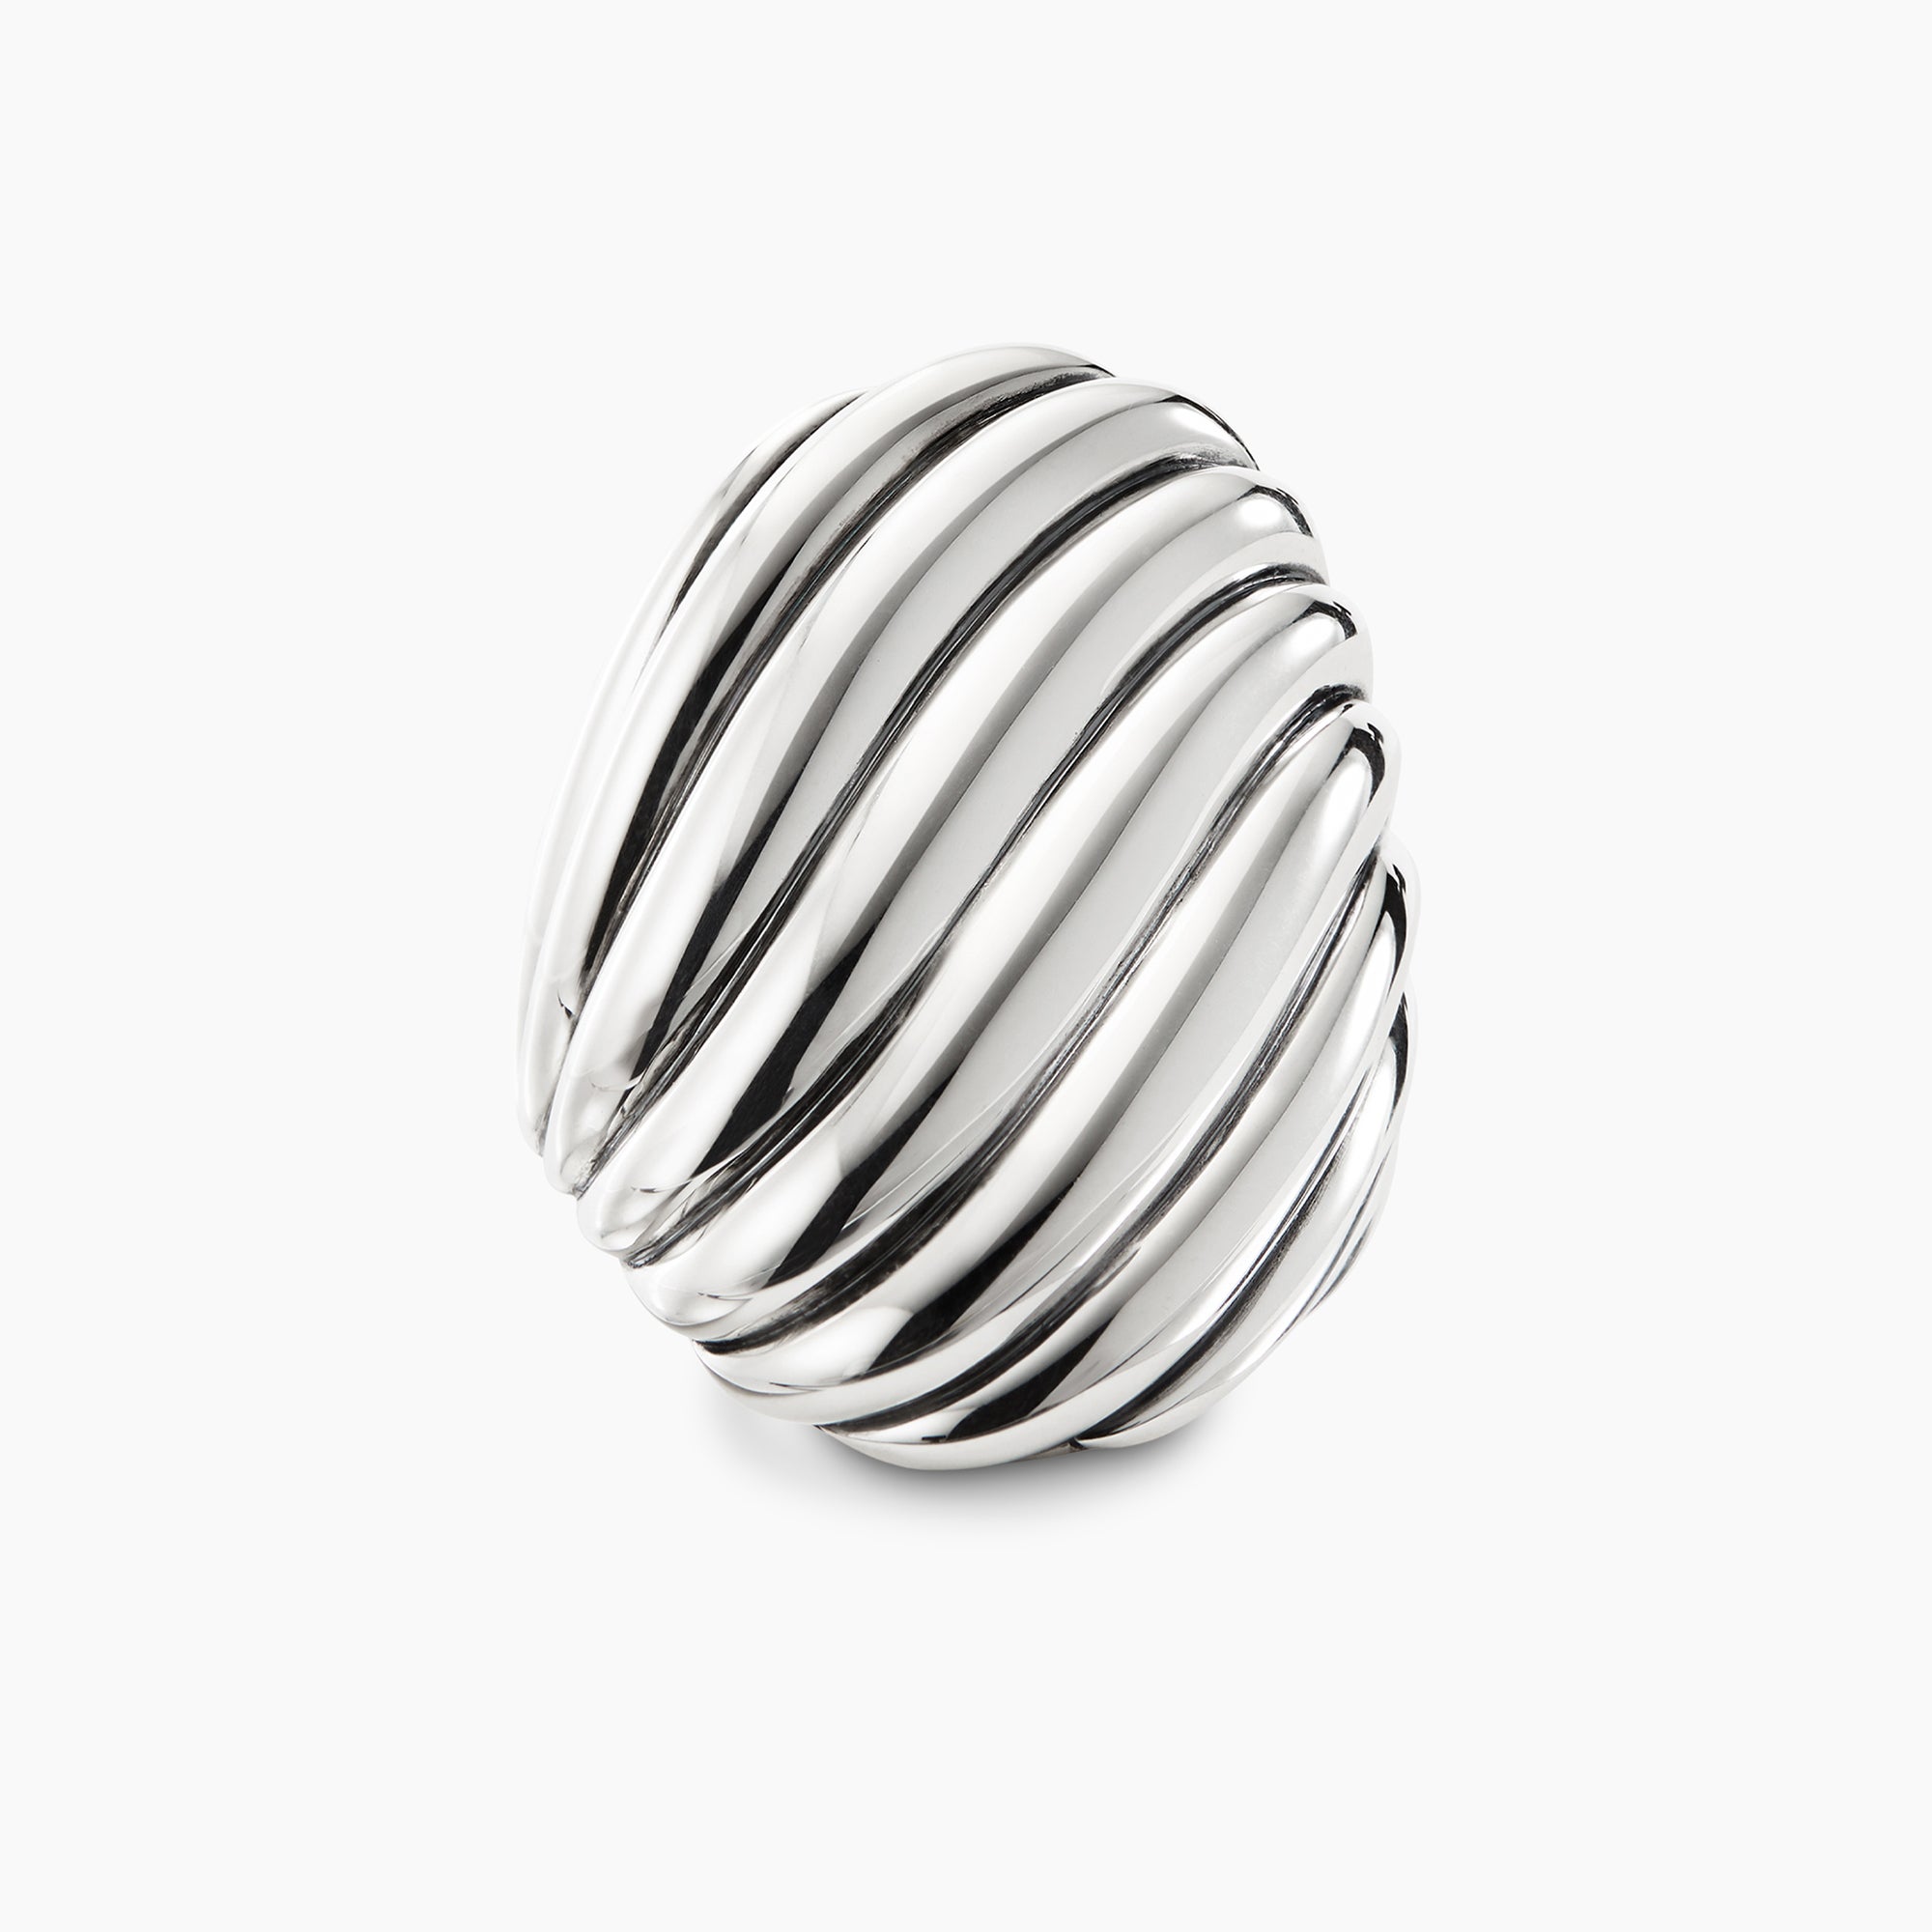 Sculpted Cable Ring in Sterling Silver, 30mm